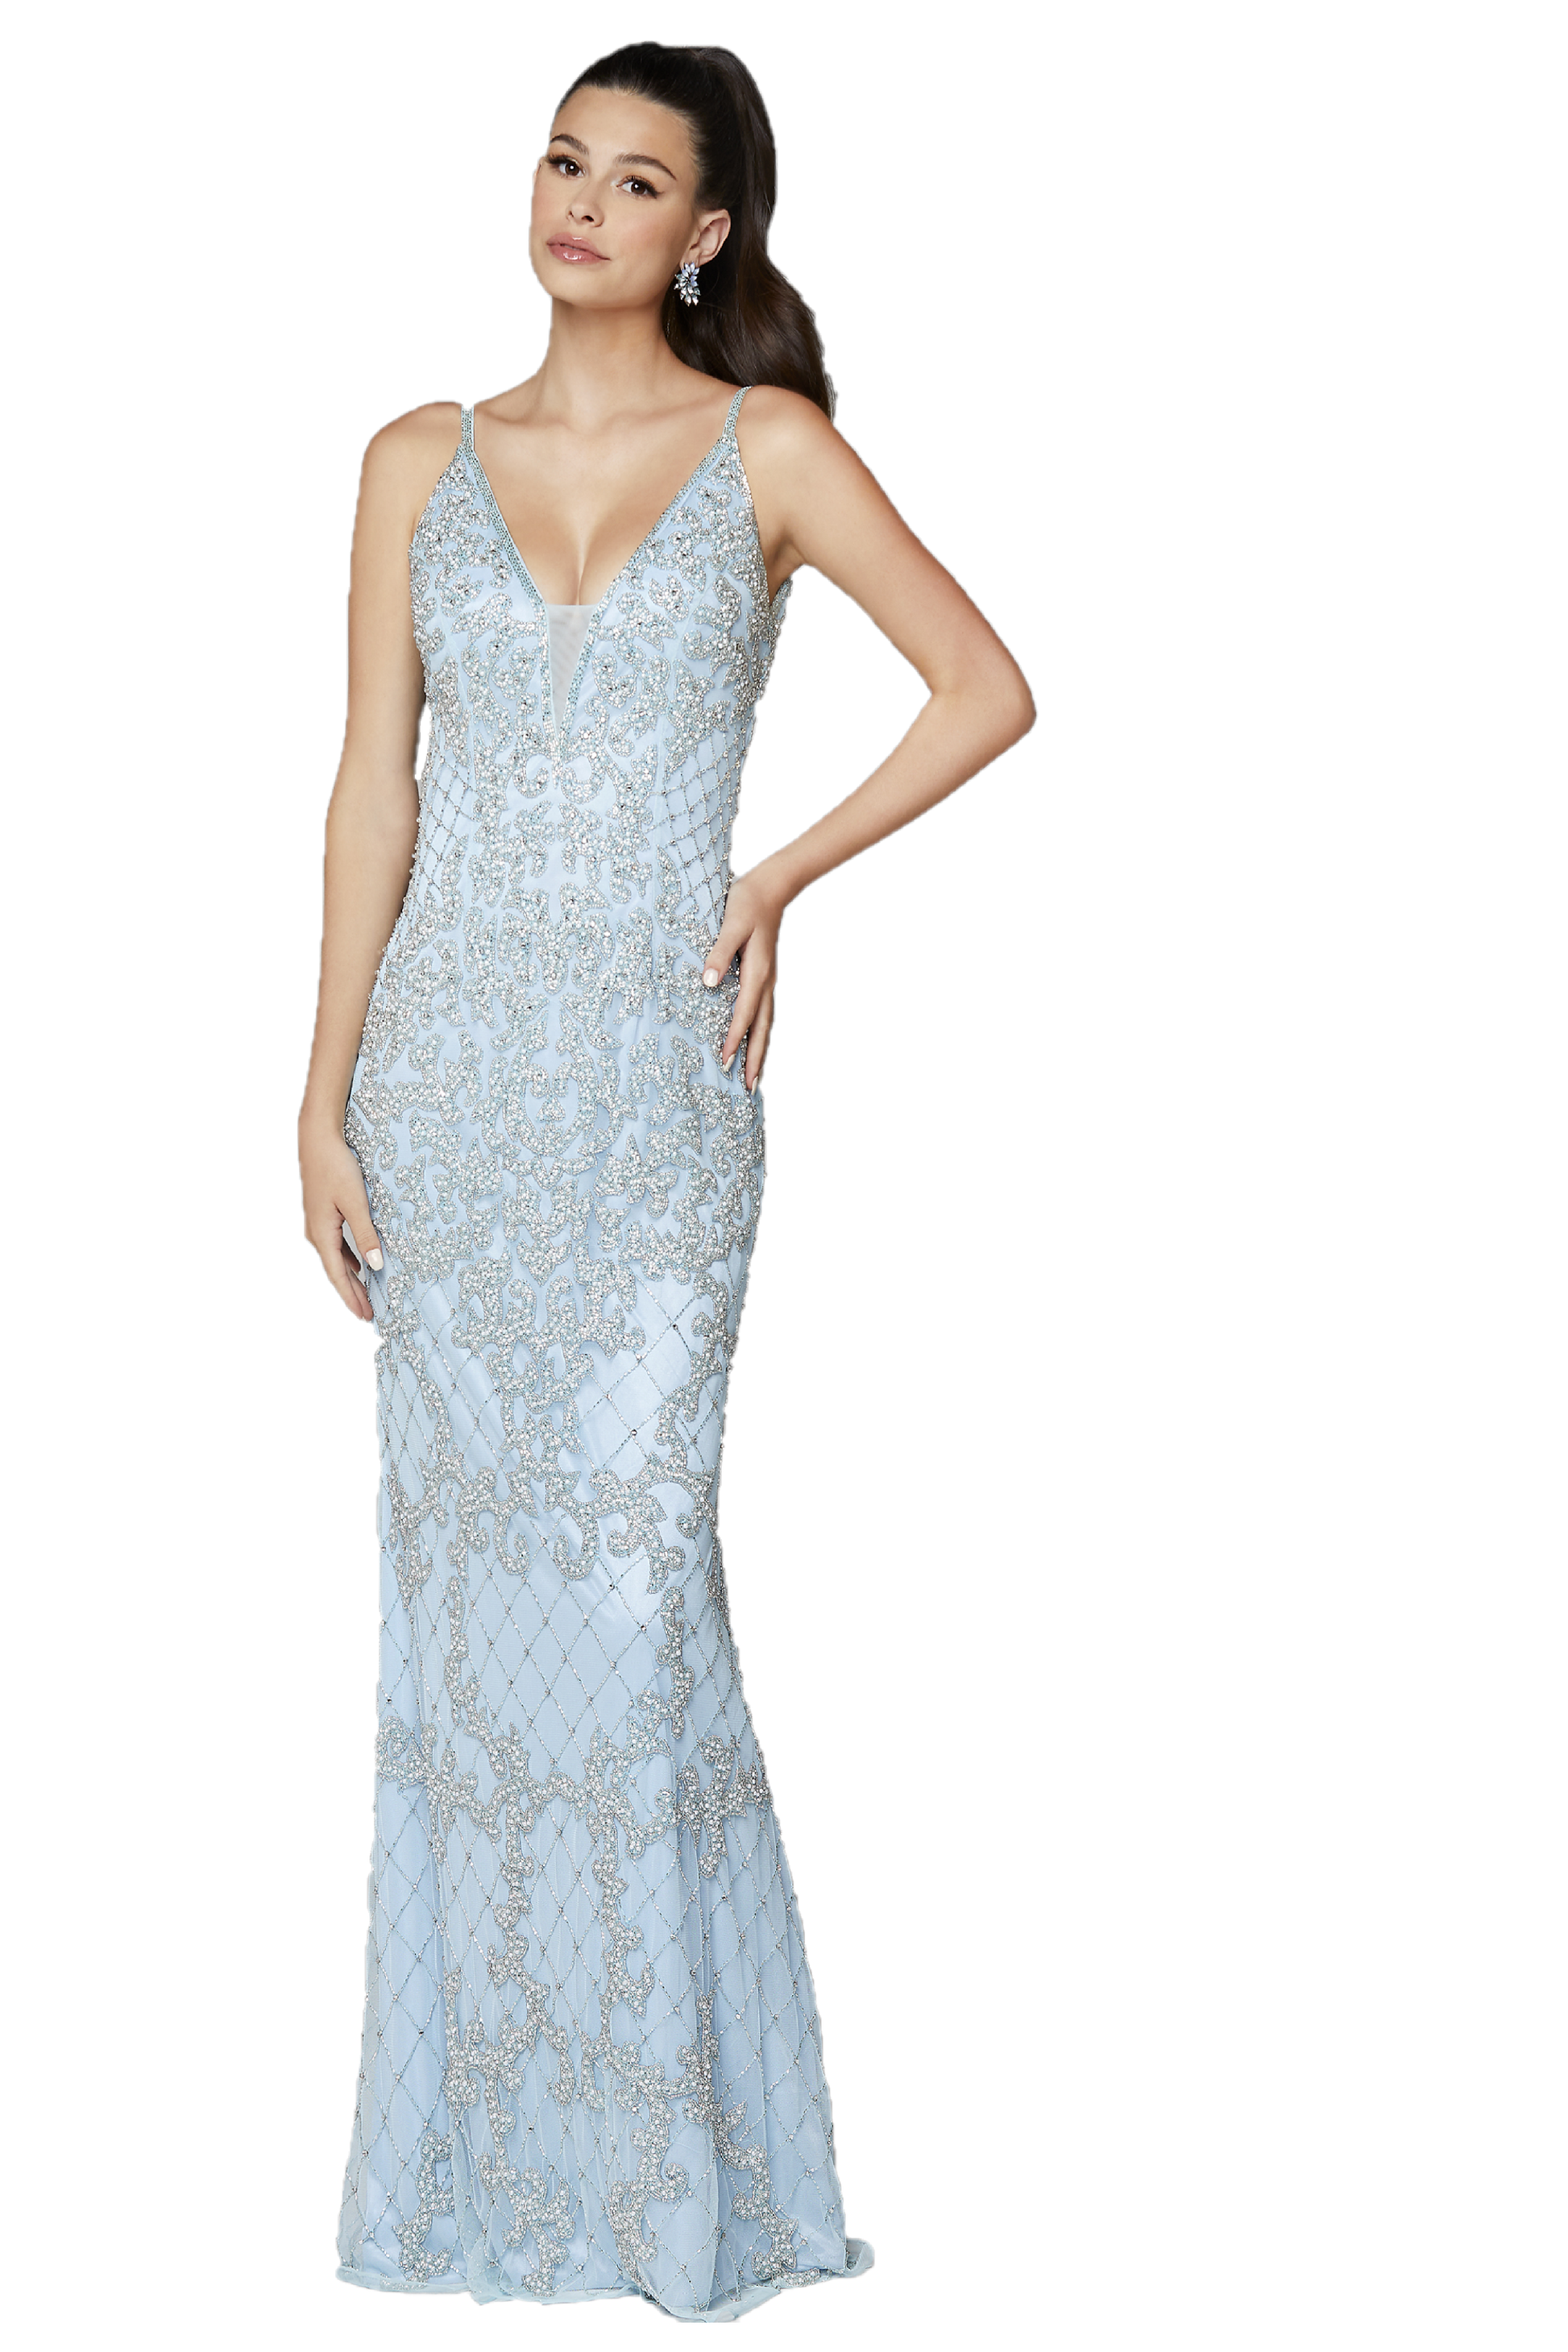 Primavera Couture 3433 is a 2020 Prom Dress, Pageant Gown, Wedding Dress & Formal Evening Wear gown. plunging neckline with mesh panel fully beaded pageant gown or evening dress. Fully Beaded & Embellished  Available colors: Black, Blush, Bottle Green, Ivory, Lilac, Platinum, Powder Blue, Yellow  Available sizes:  00,0,2,4,6,8,10,12,14,16,18